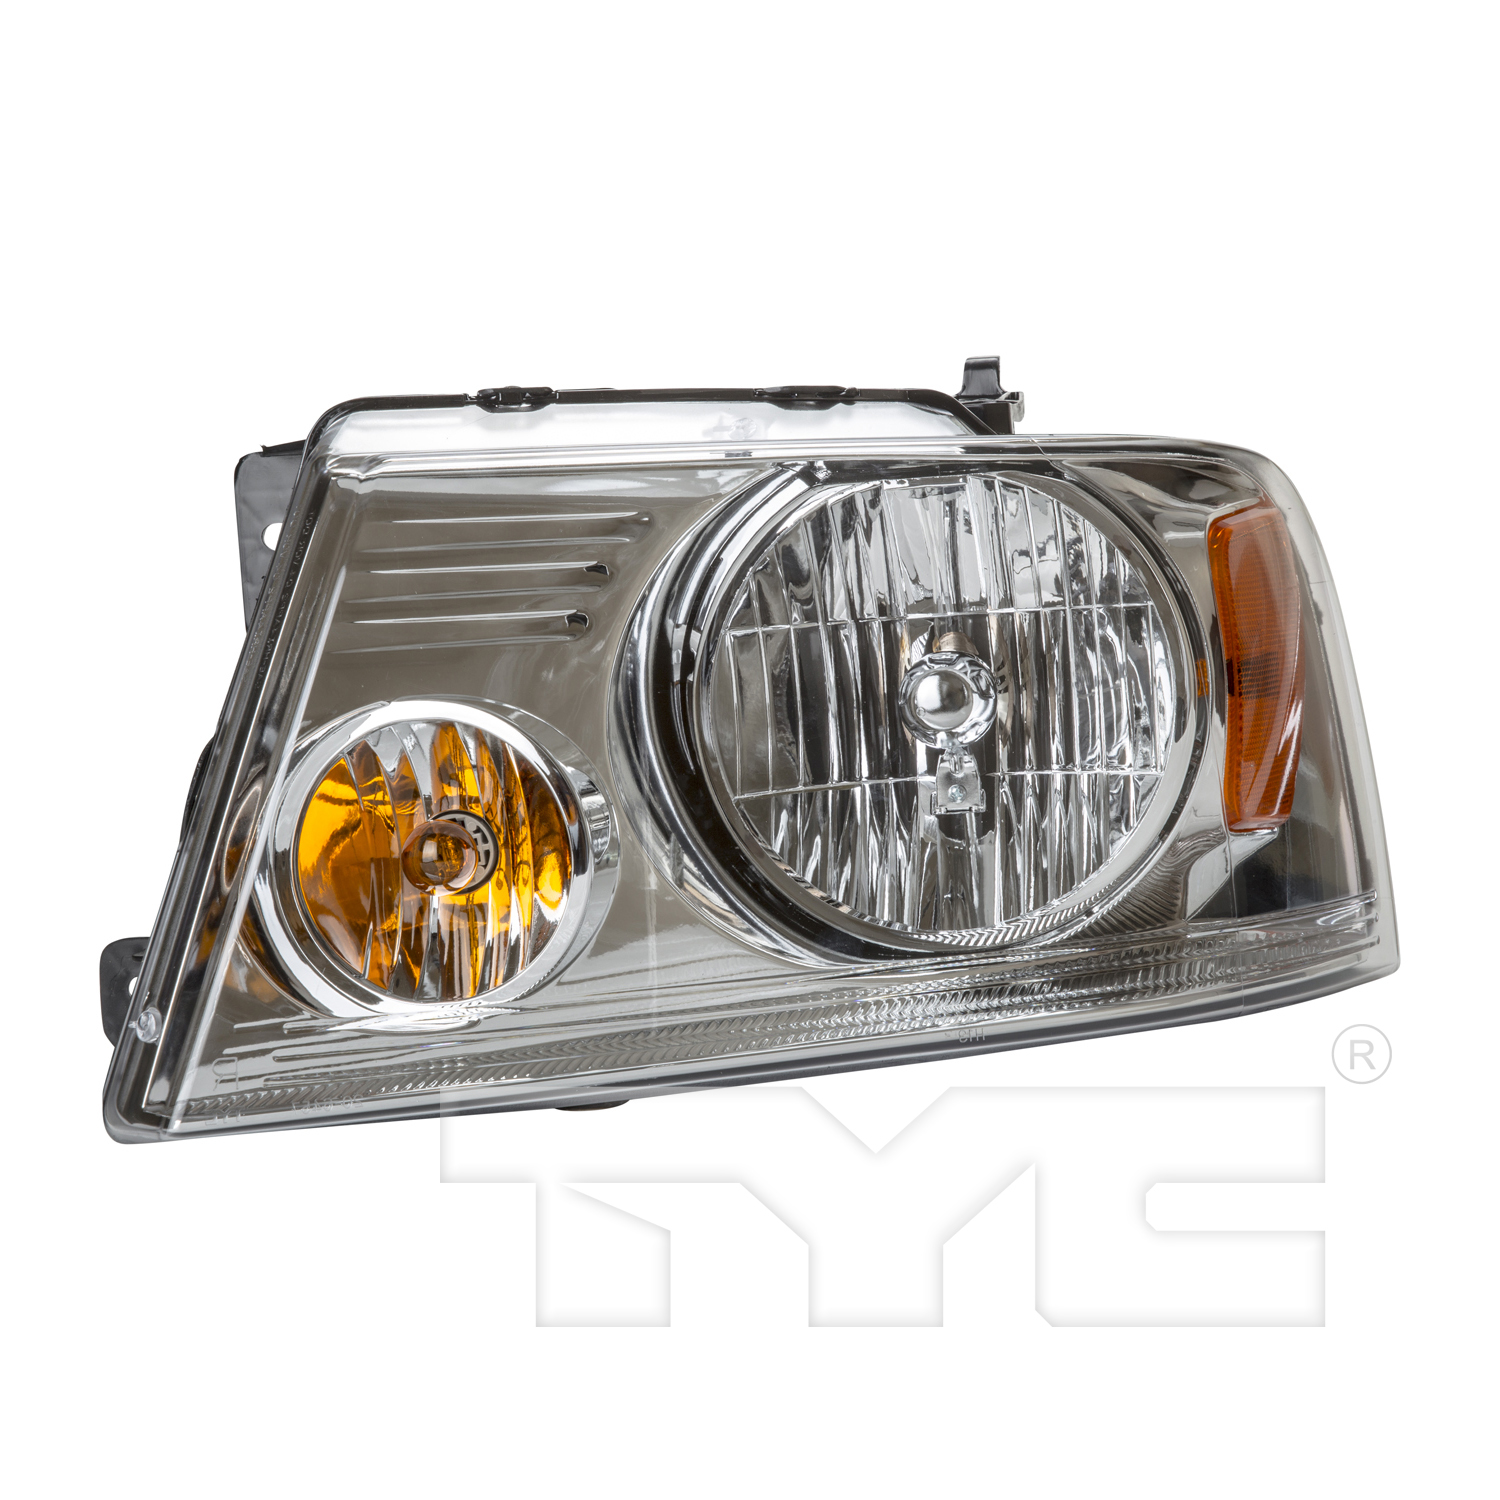 Aftermarket HEADLIGHTS for FORD - F-150, F-150,04-08,LT Headlamp assy composite